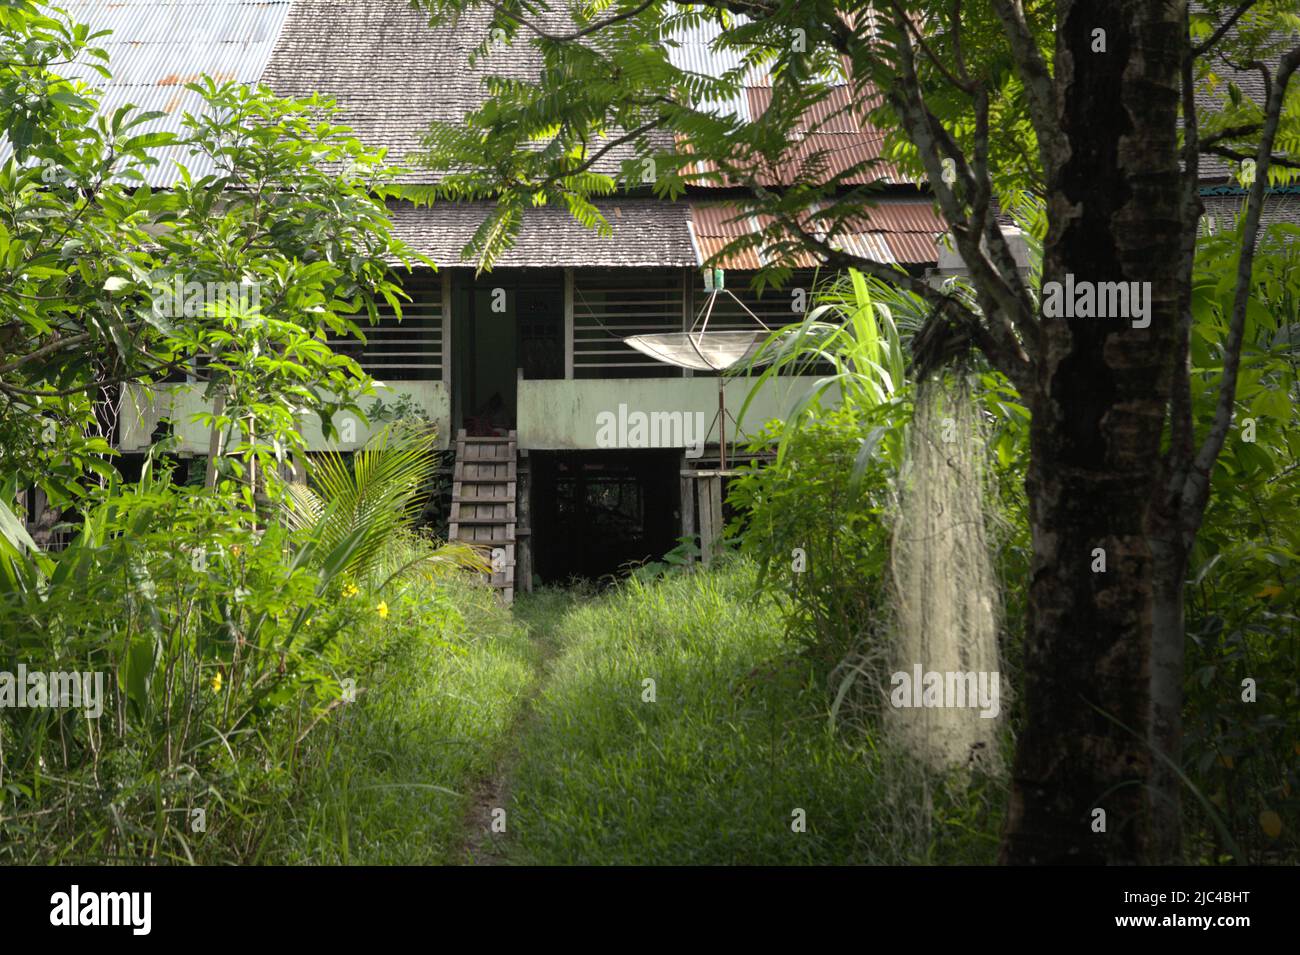 The longhouse of Melapi Patamuan, which is built and inhabited by Dayak ...